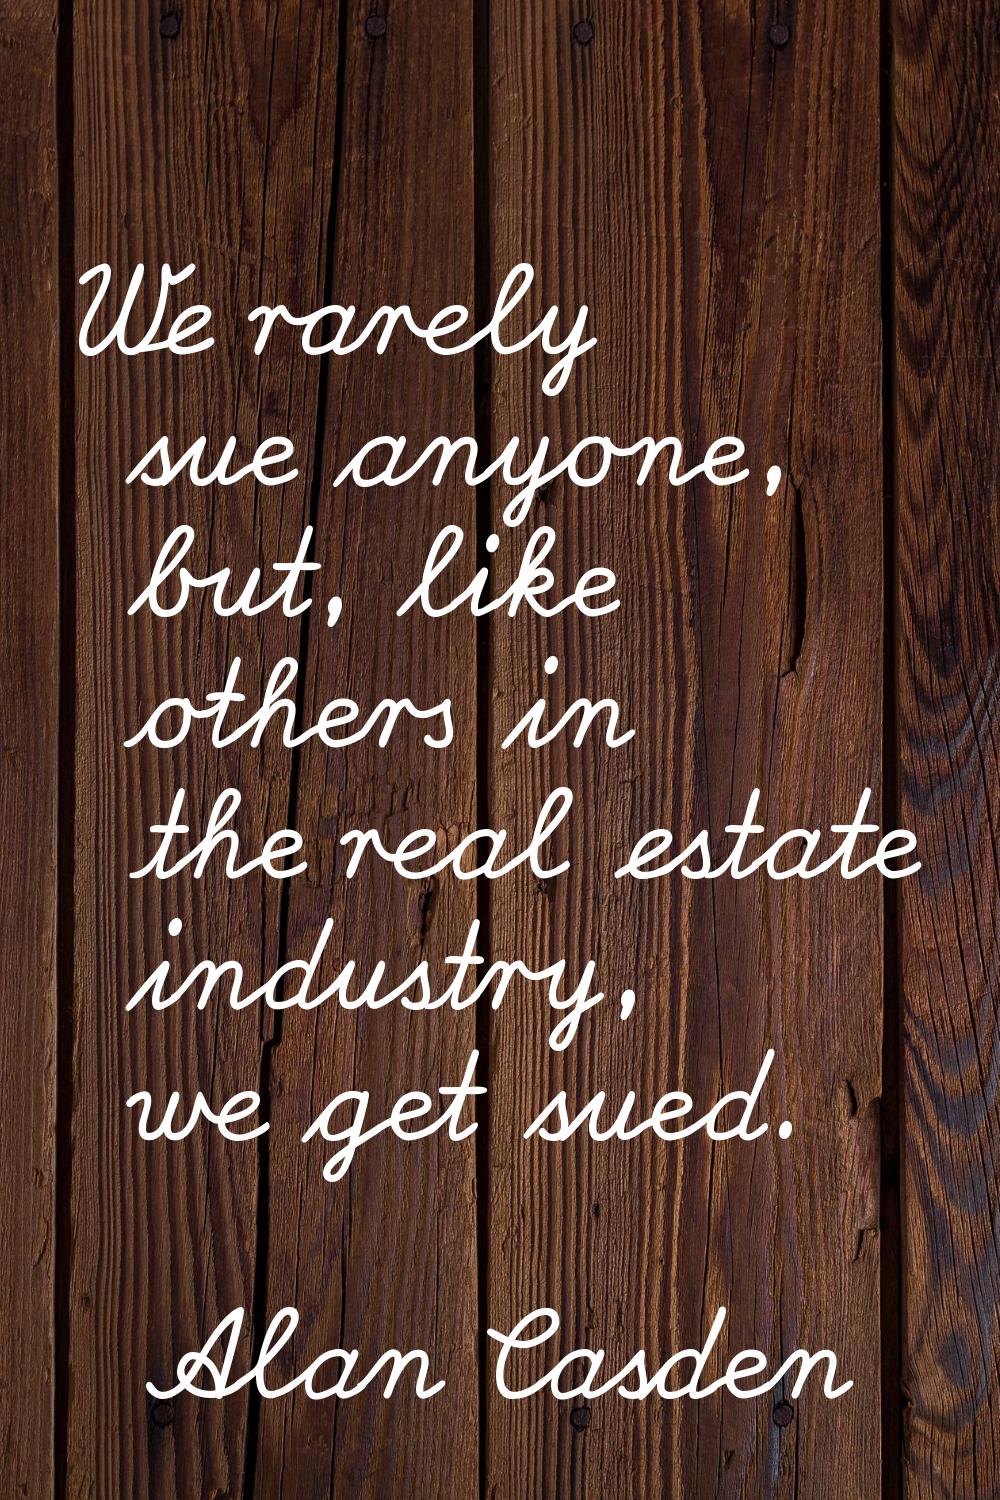 We rarely sue anyone, but, like others in the real estate industry, we get sued.